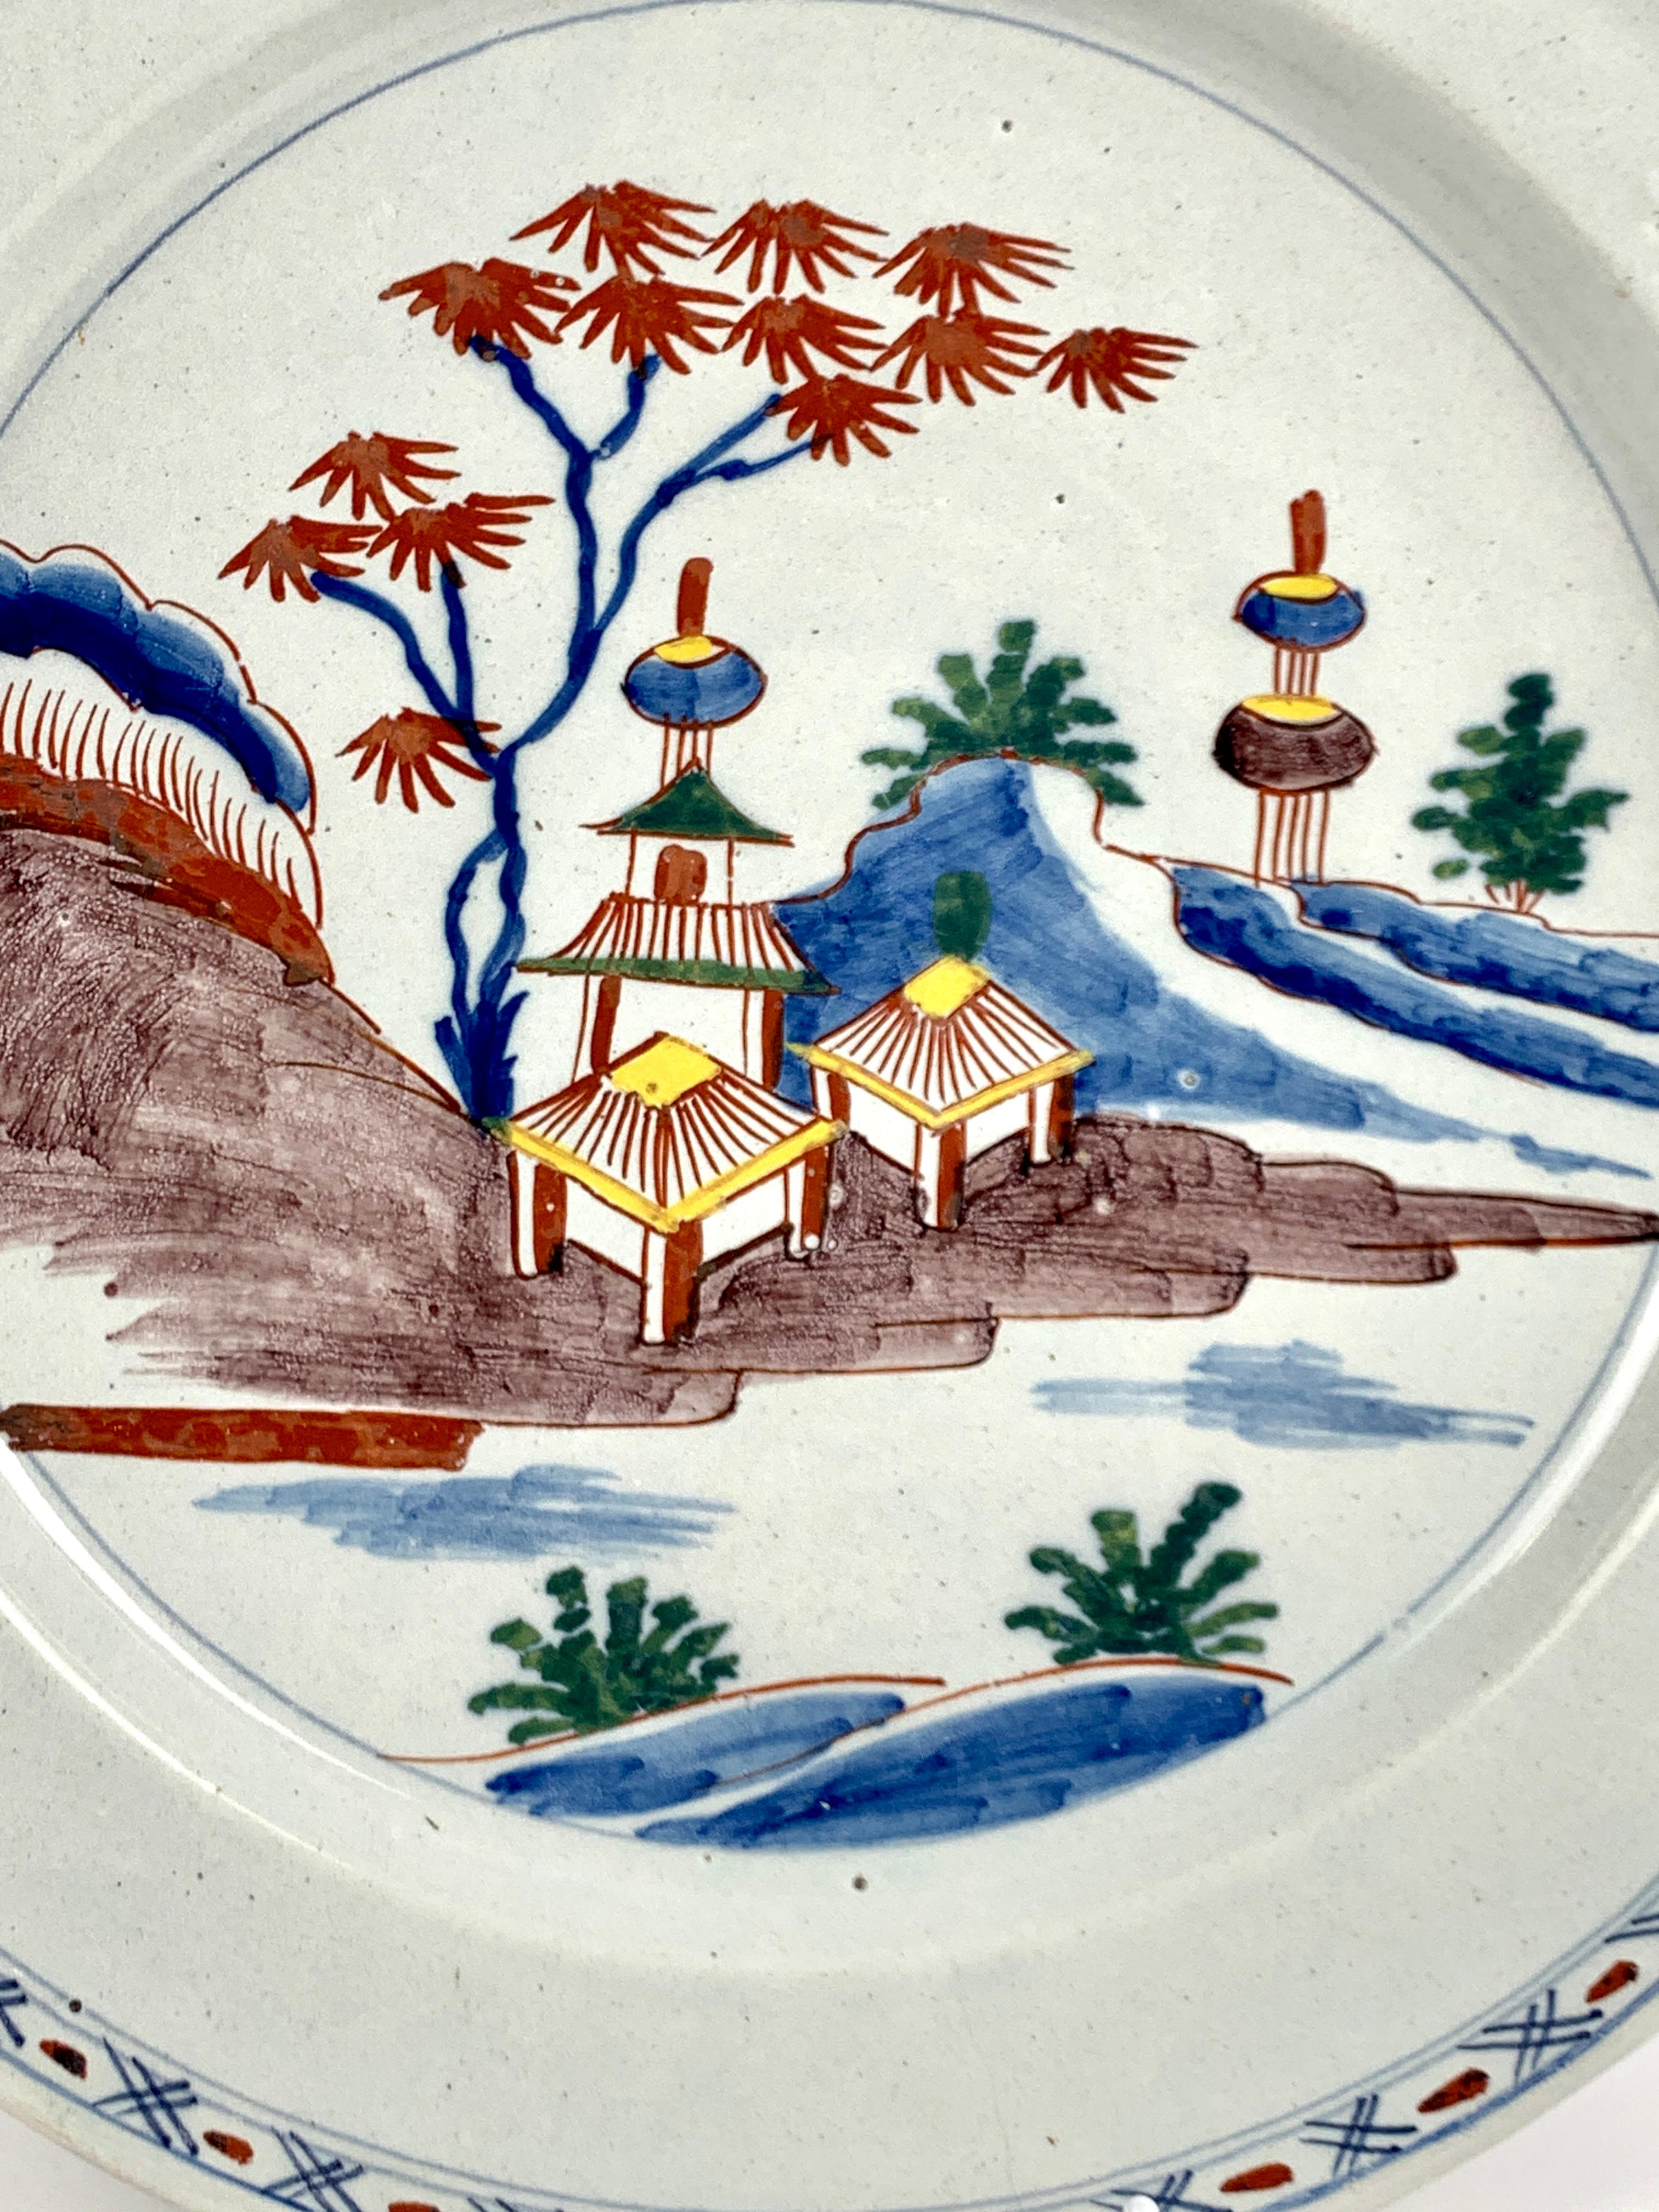 This antique Dutch Delft charger was hand painted in the 18th century, circa 1770.
The center of this large Dutch Delft charger shows a lovely chinoiserie scene painted in vibrant polychrome colors, including blue, green, yellow, purple, and iron